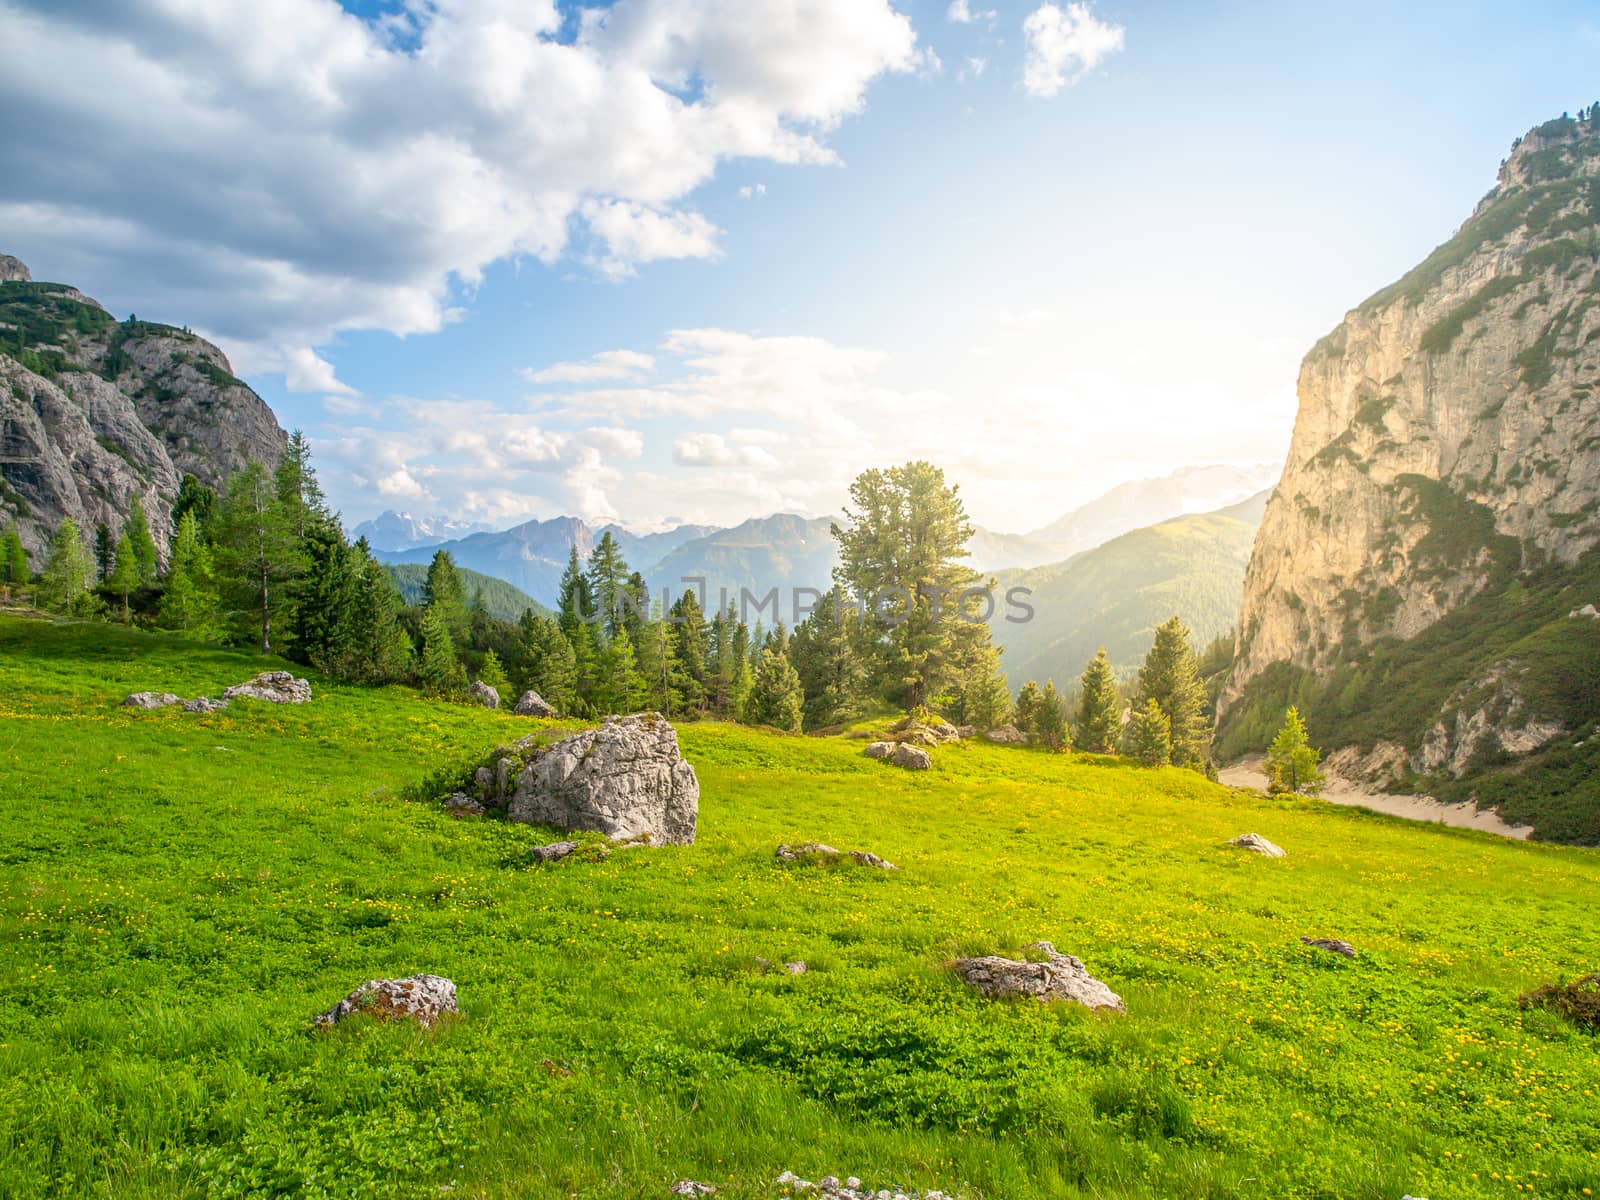 Landscape of Dolomites near Passo Falzarego. With green meadows, blue sky, white clouds and rocky mountains by pyty